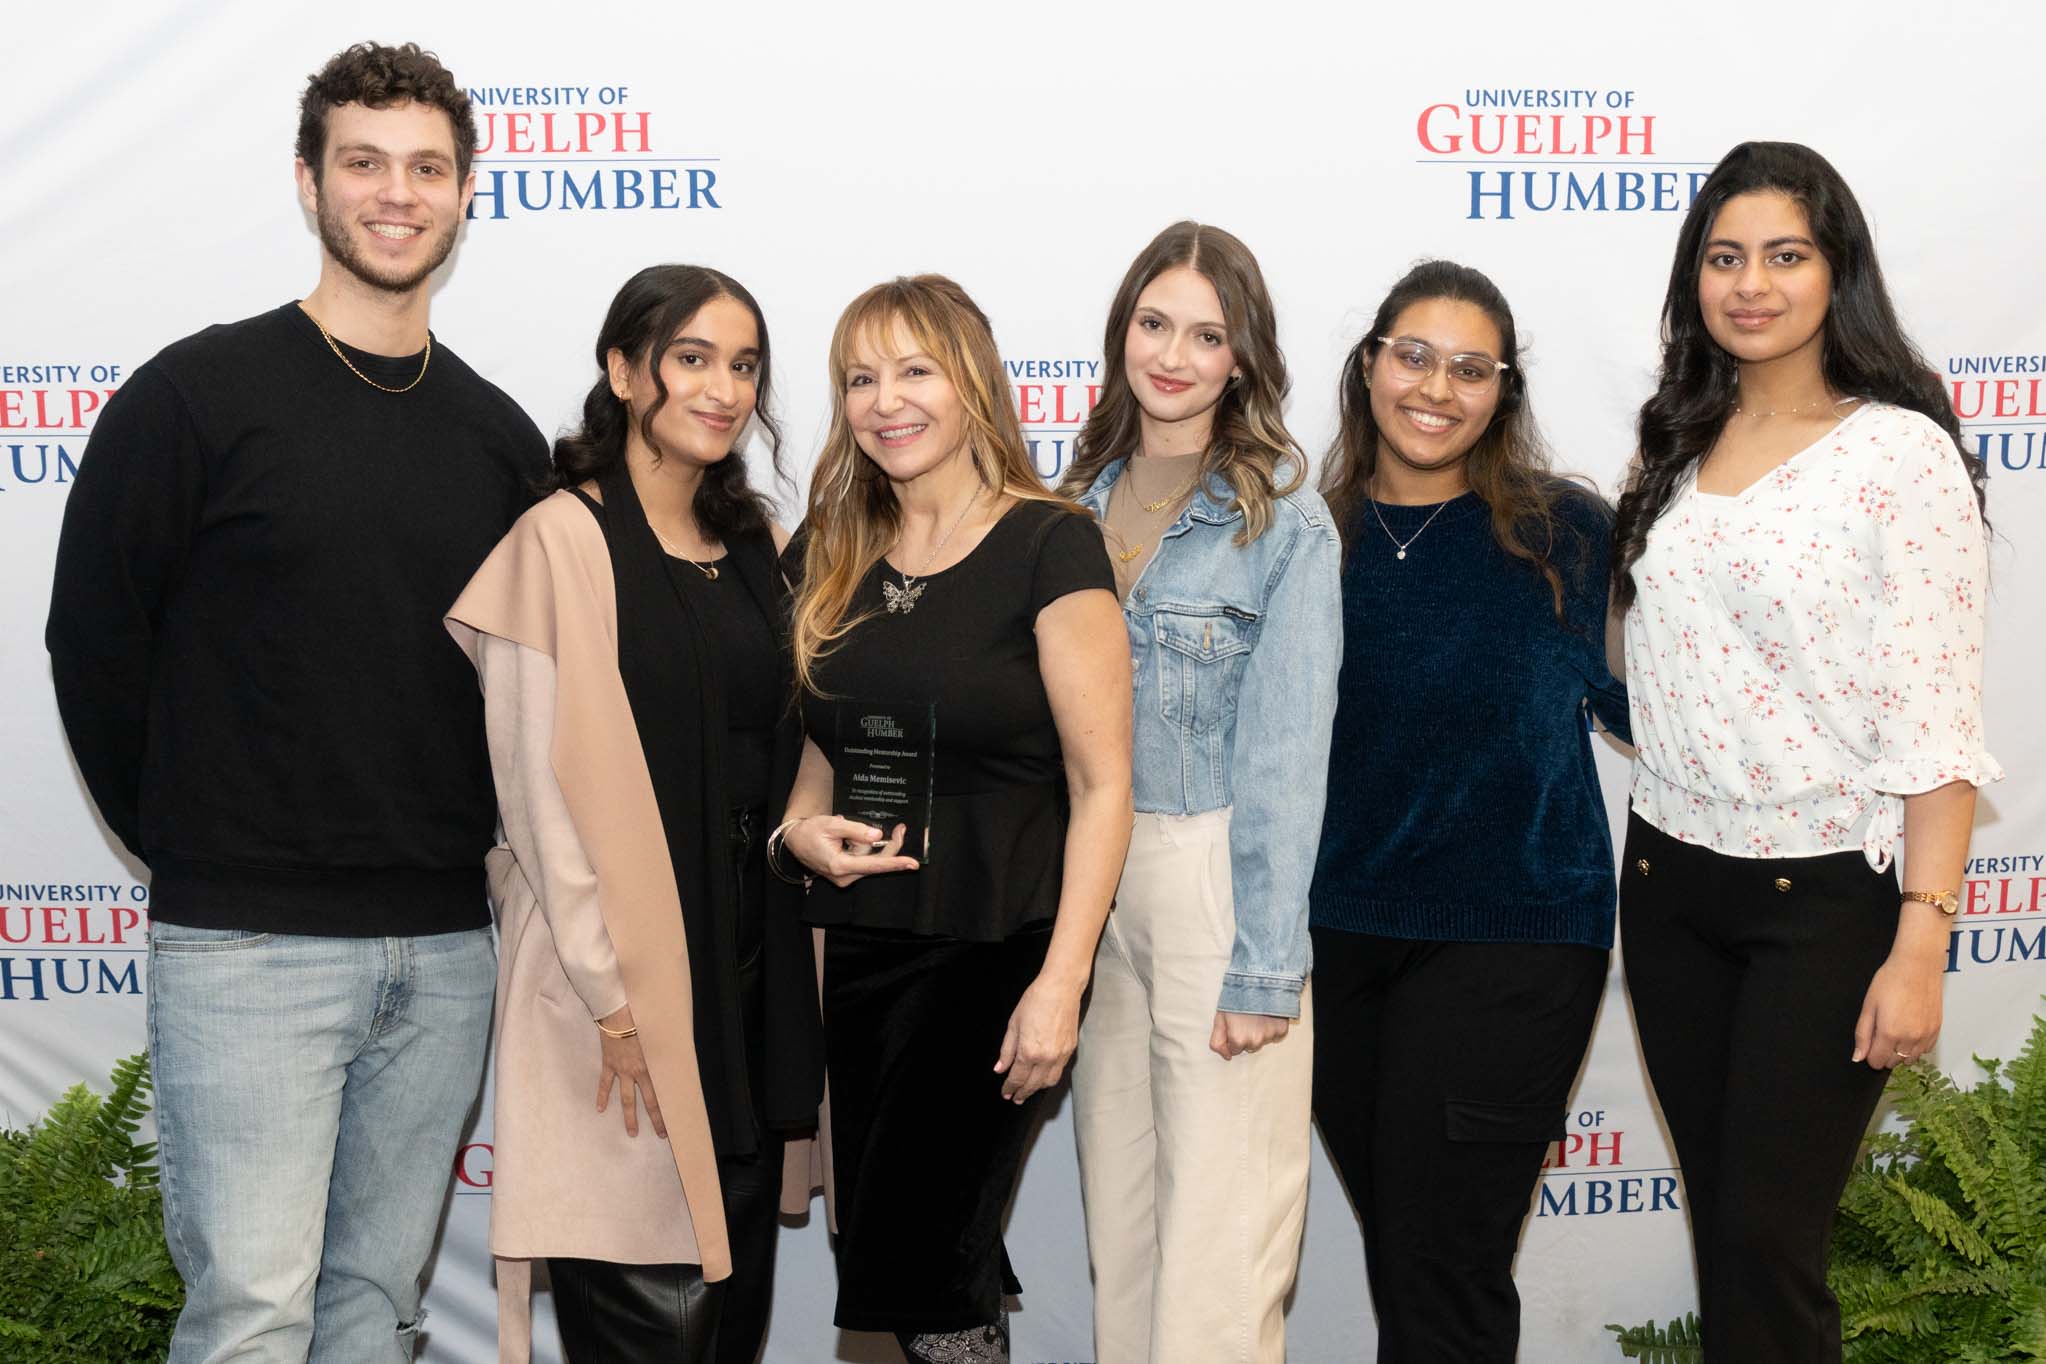 Award recipient, Aida Memisevic, with some of her graduating Business students